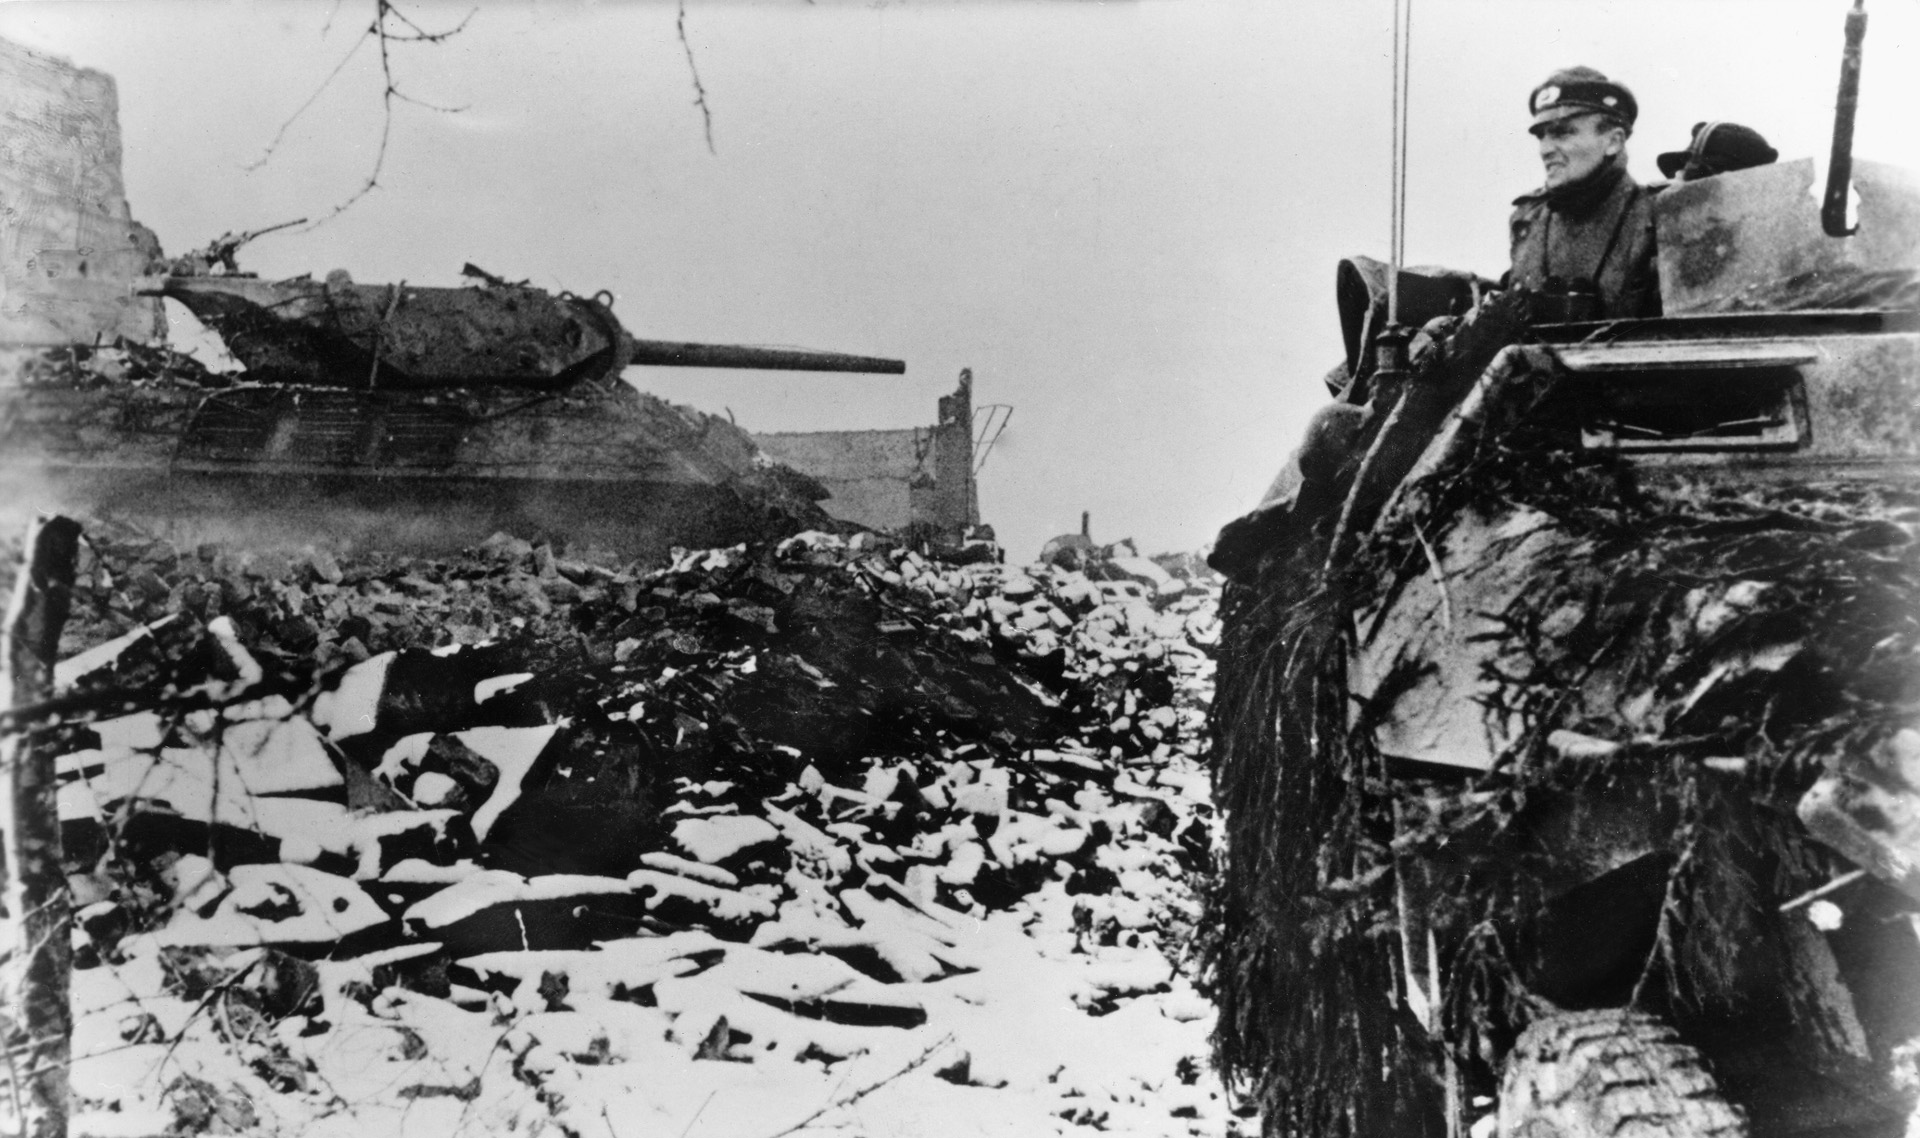 A German half-track advances past a disabled American tank destroyer on December 20, 1944, during Operation Wacht em Rhein.